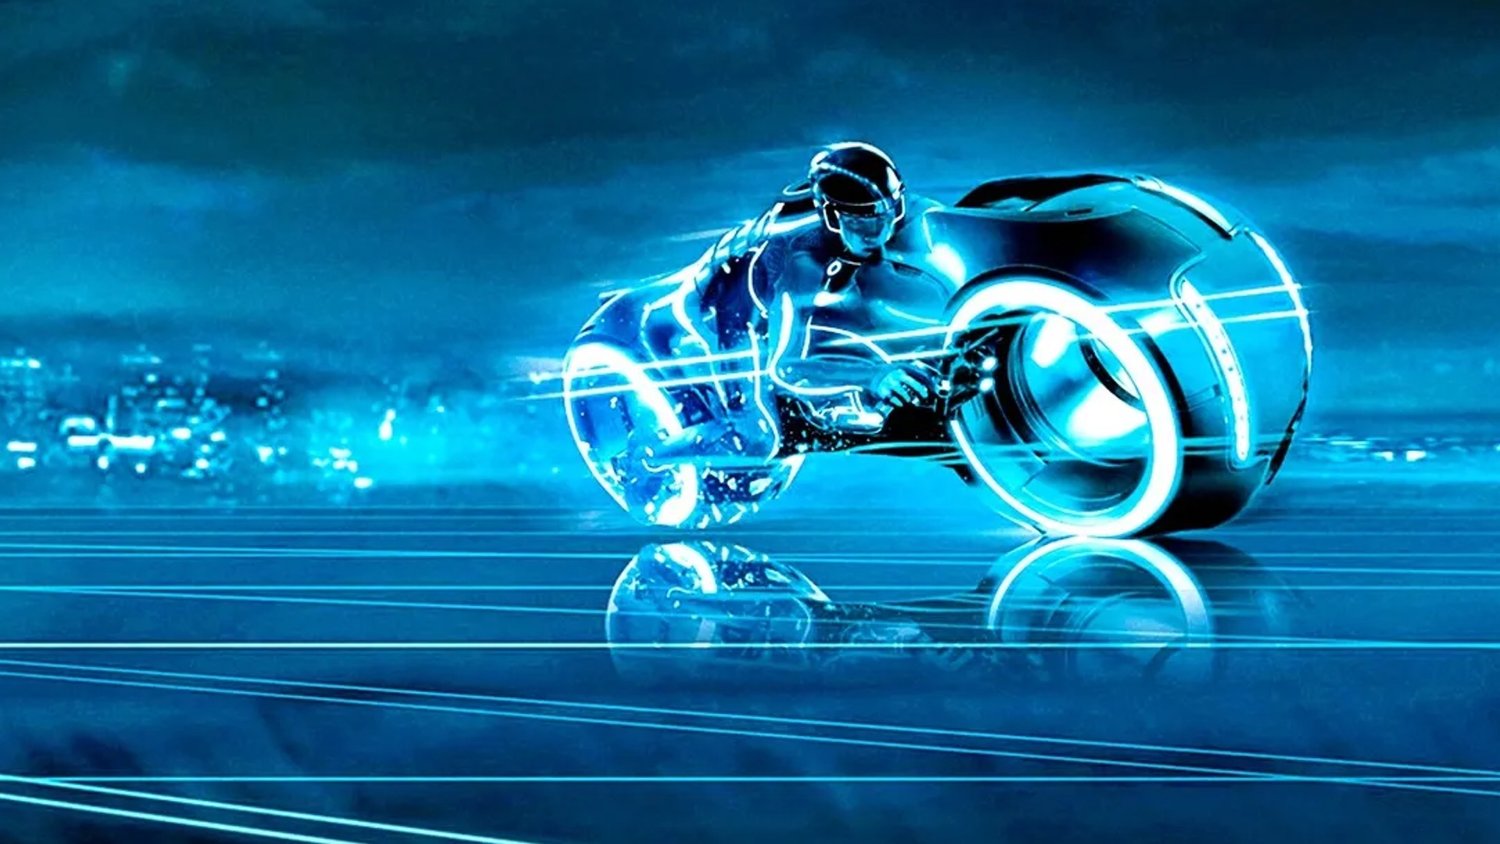 TRON: ARES Director Vents Frustration Over Strikes as His Film Production Has Been Shut Down